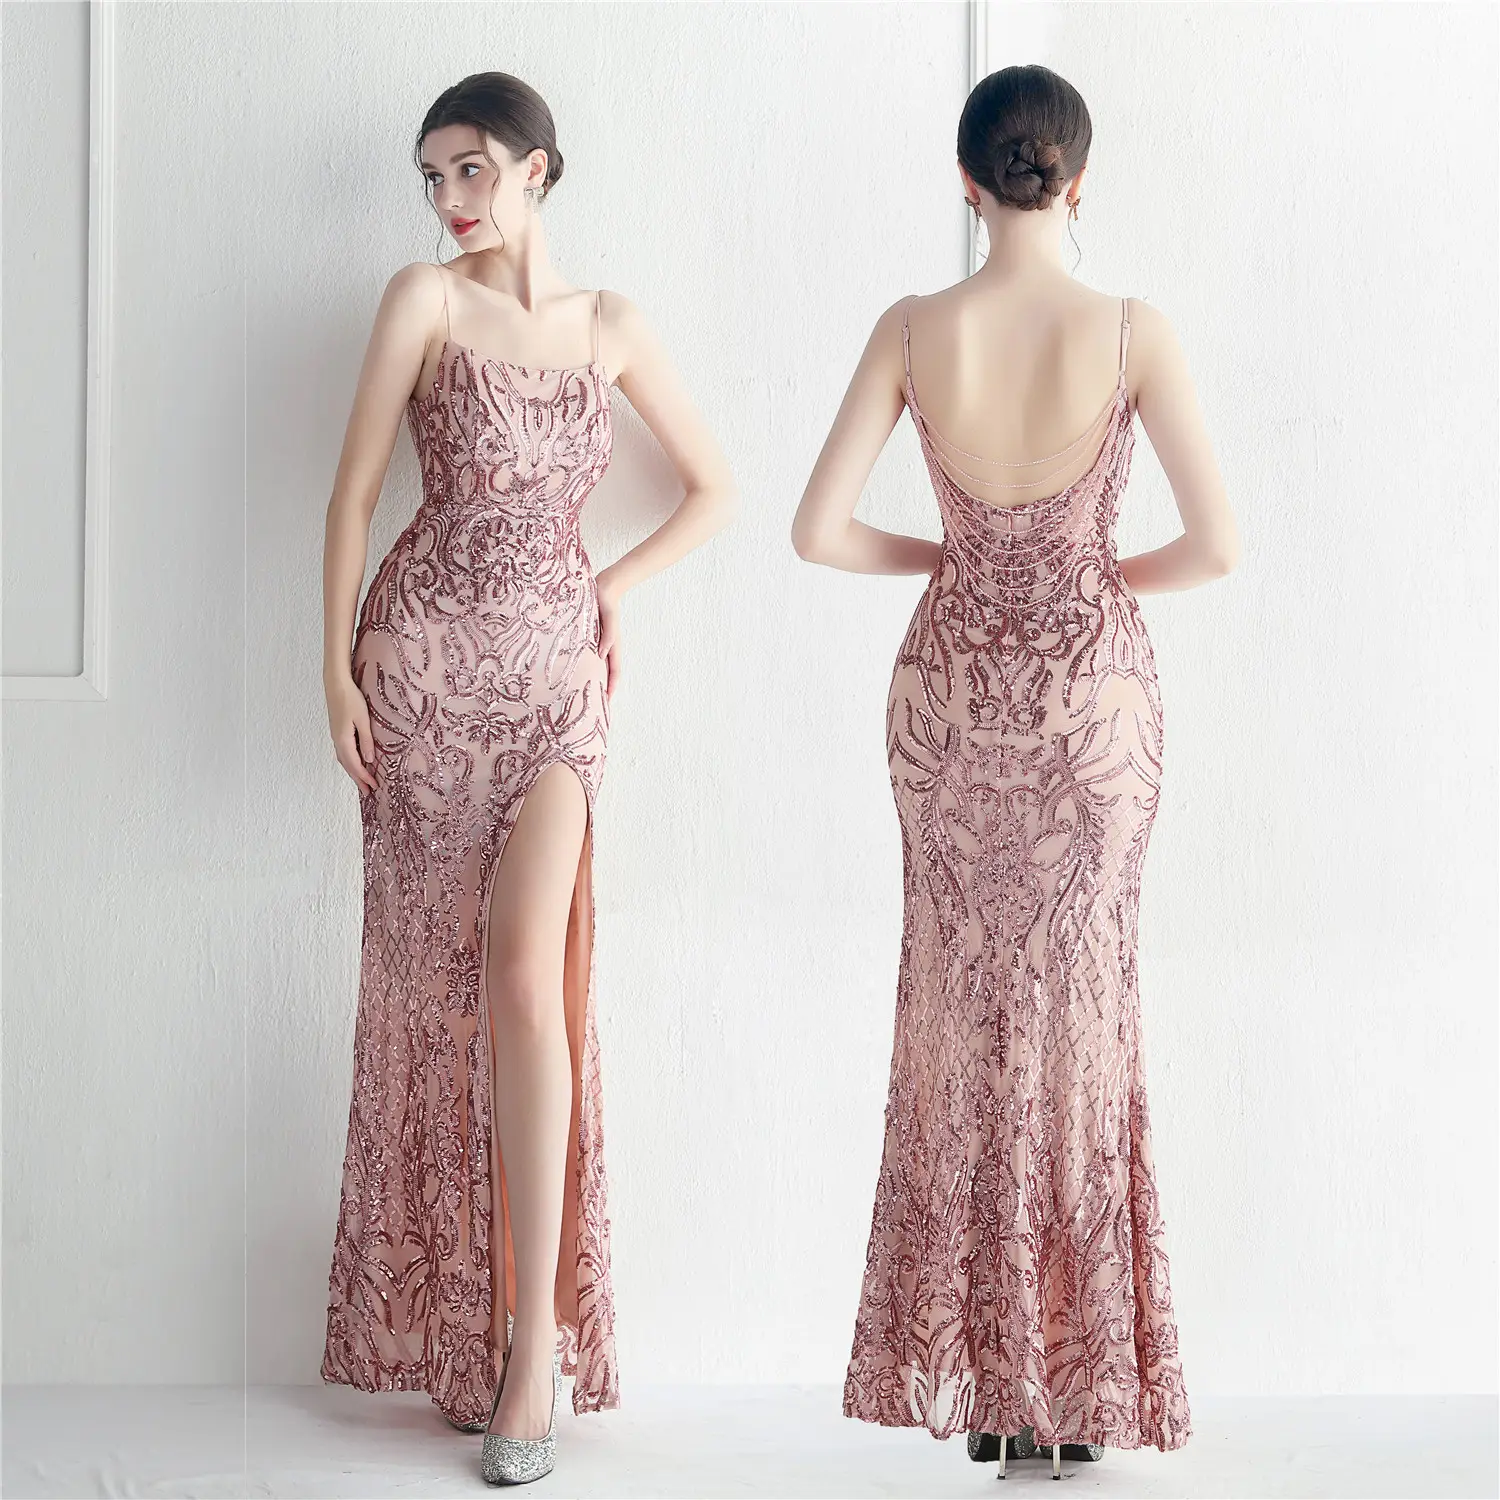 Cross-border Bridesmaids Socialite stars Wedding PROM party Sexy dress positioning floral beaded pieces